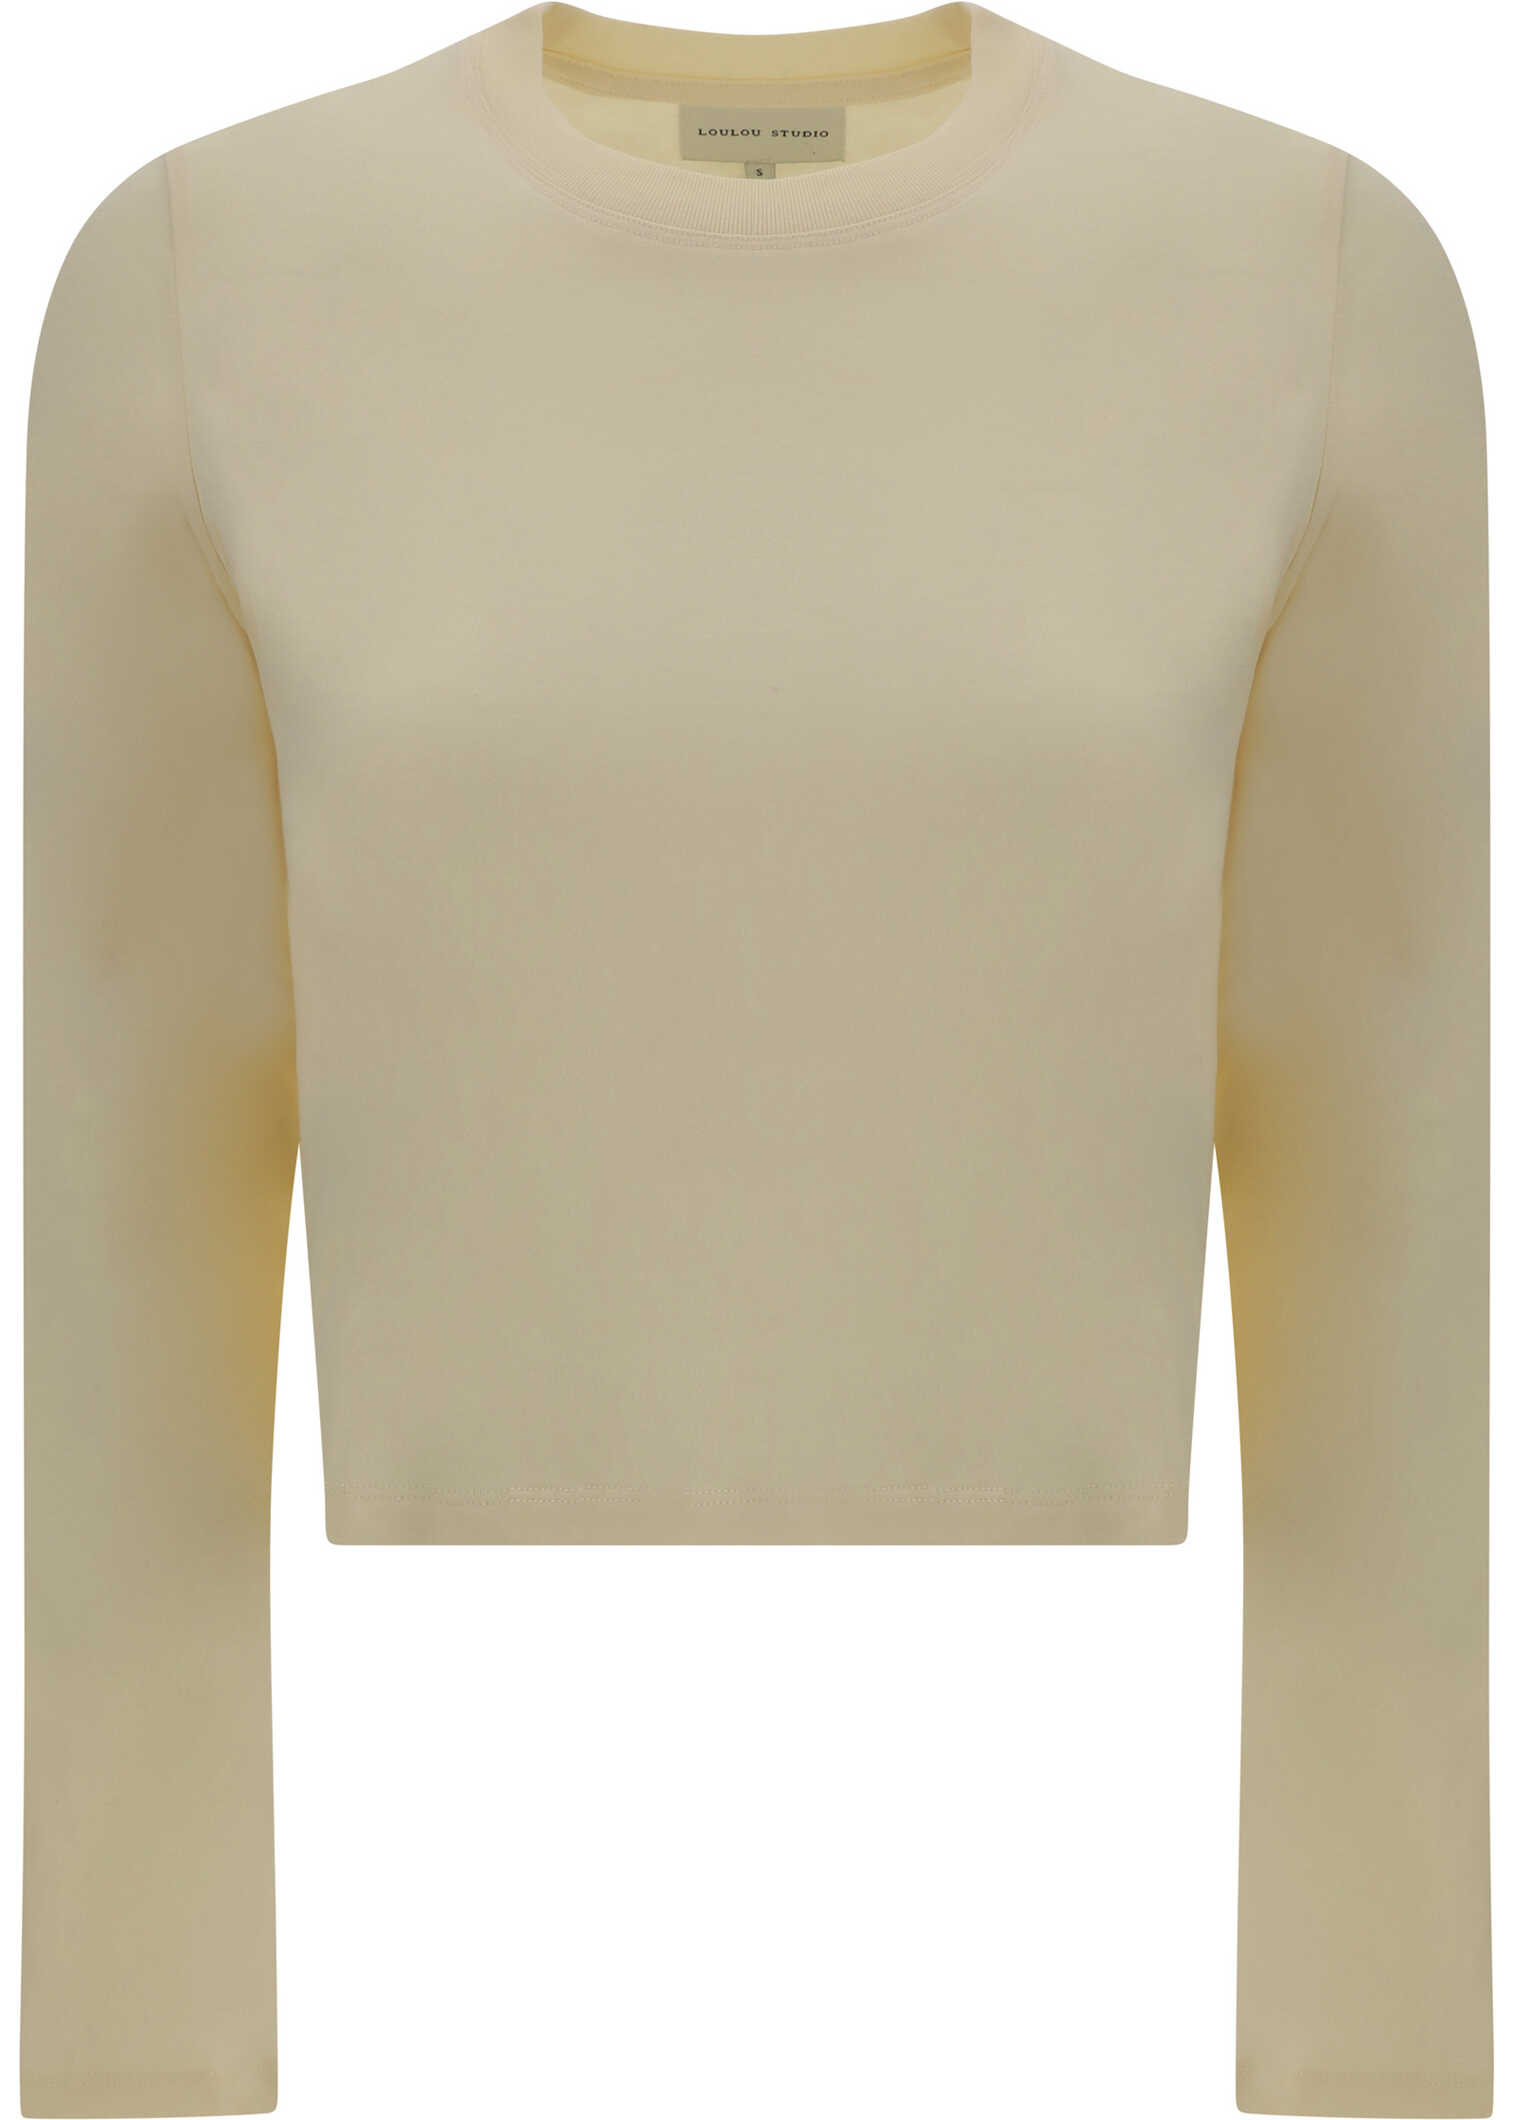 Loulou Studio Long Sleeve Jersey RICE IVORY